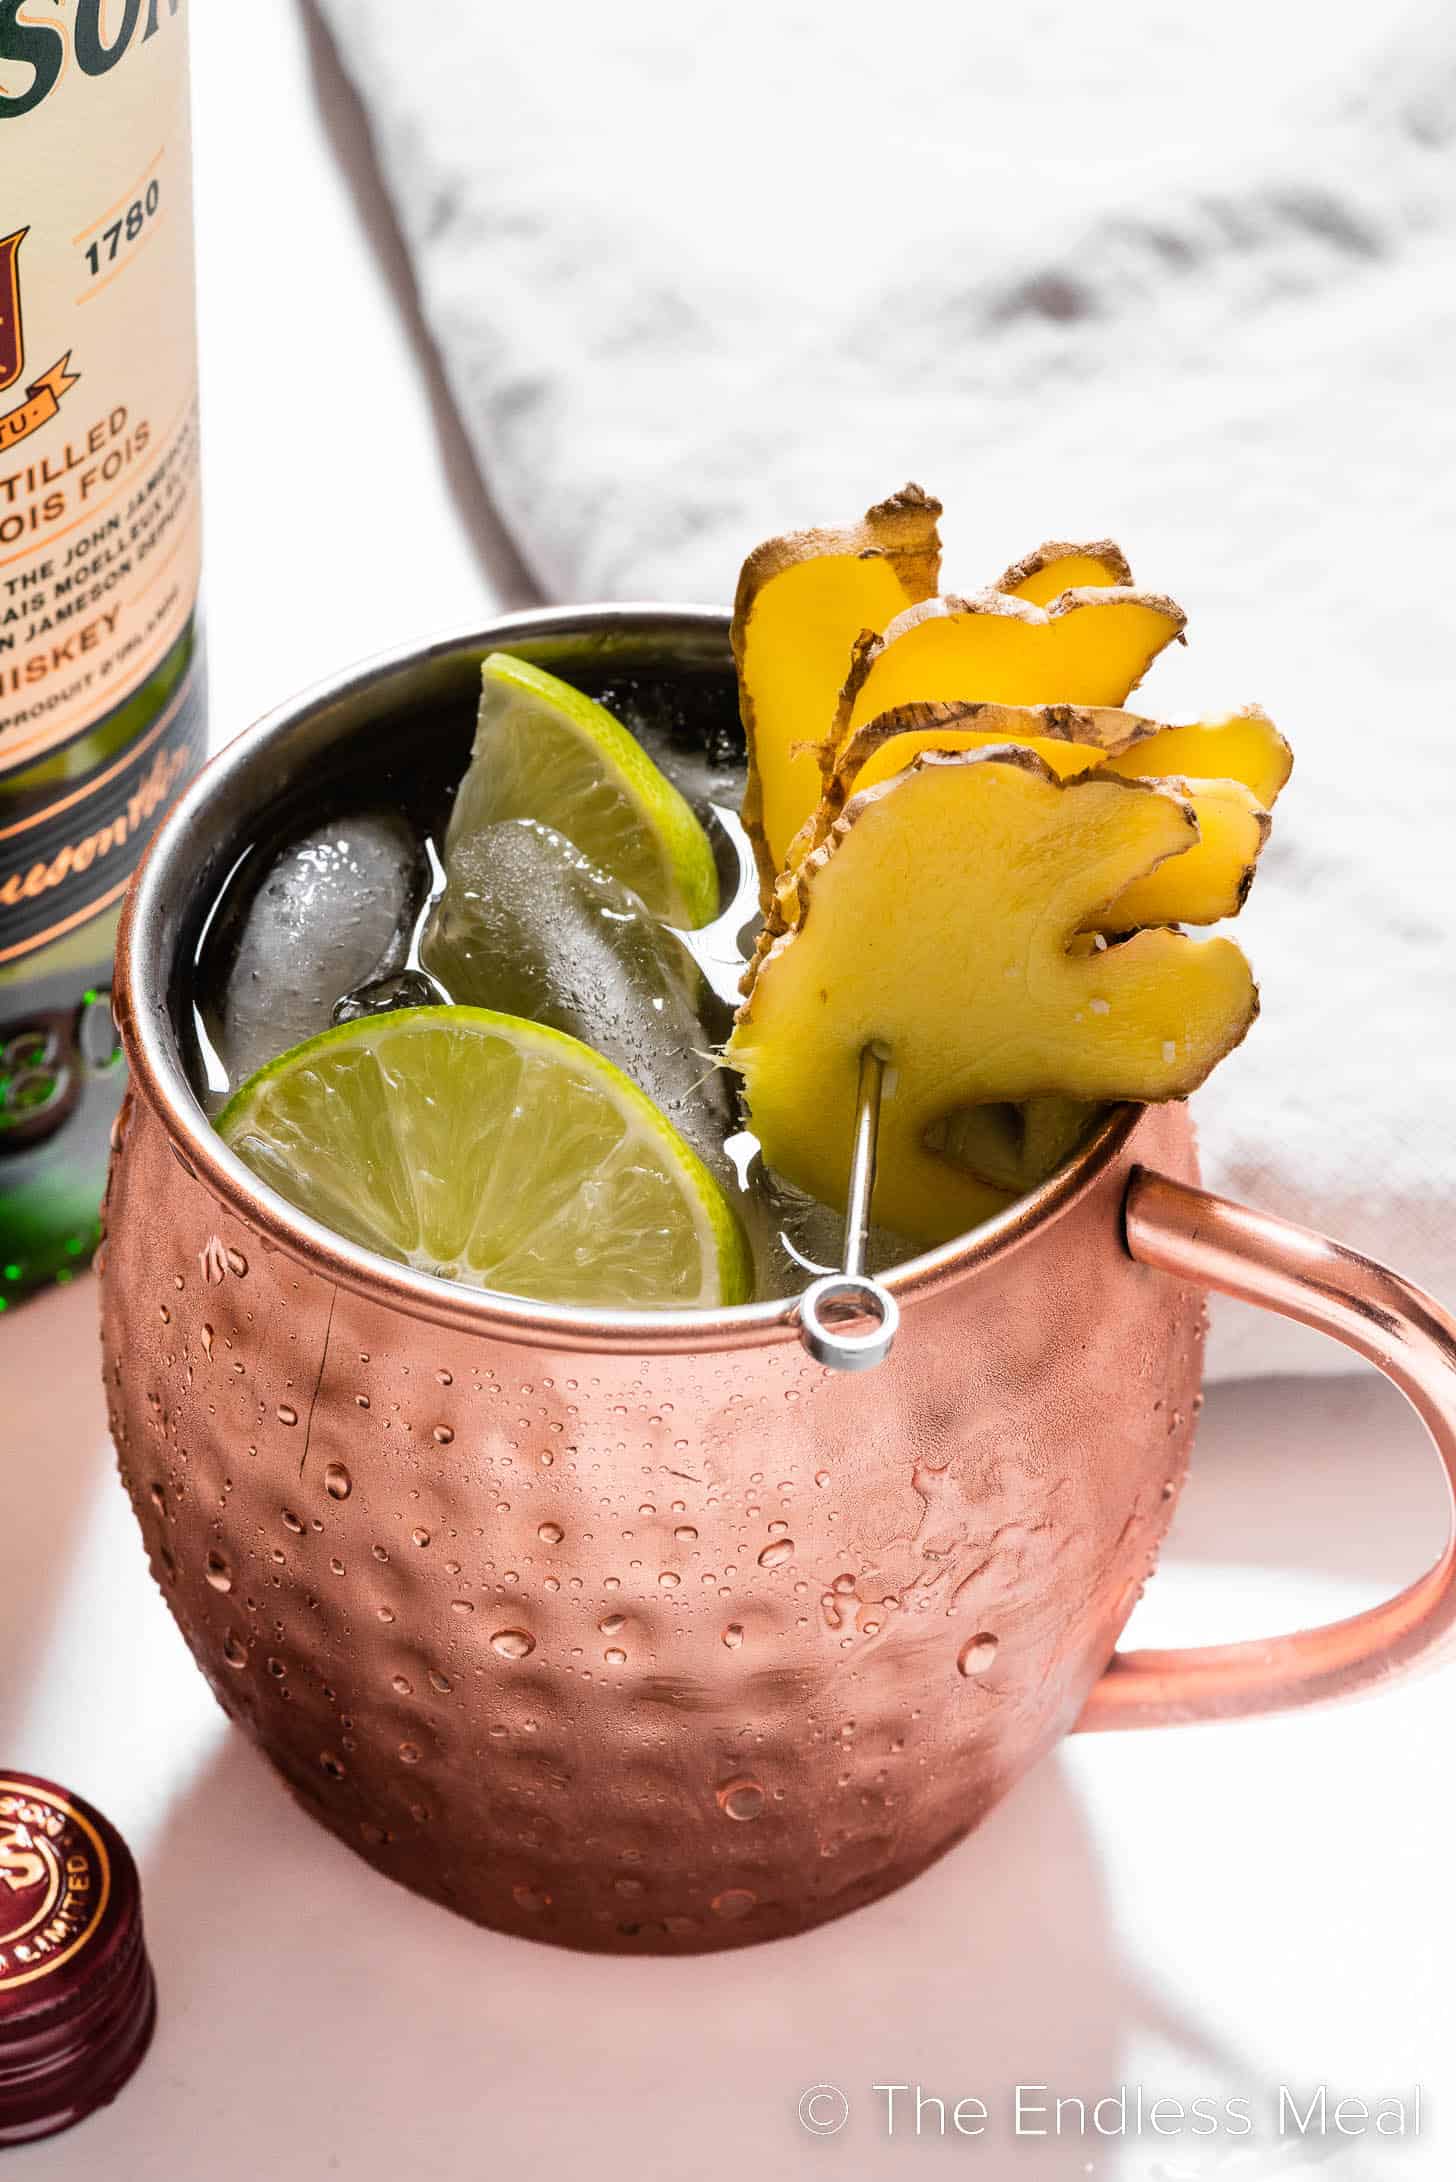 An Irish Mule in a copper mug garnished with fresh ginger and limes